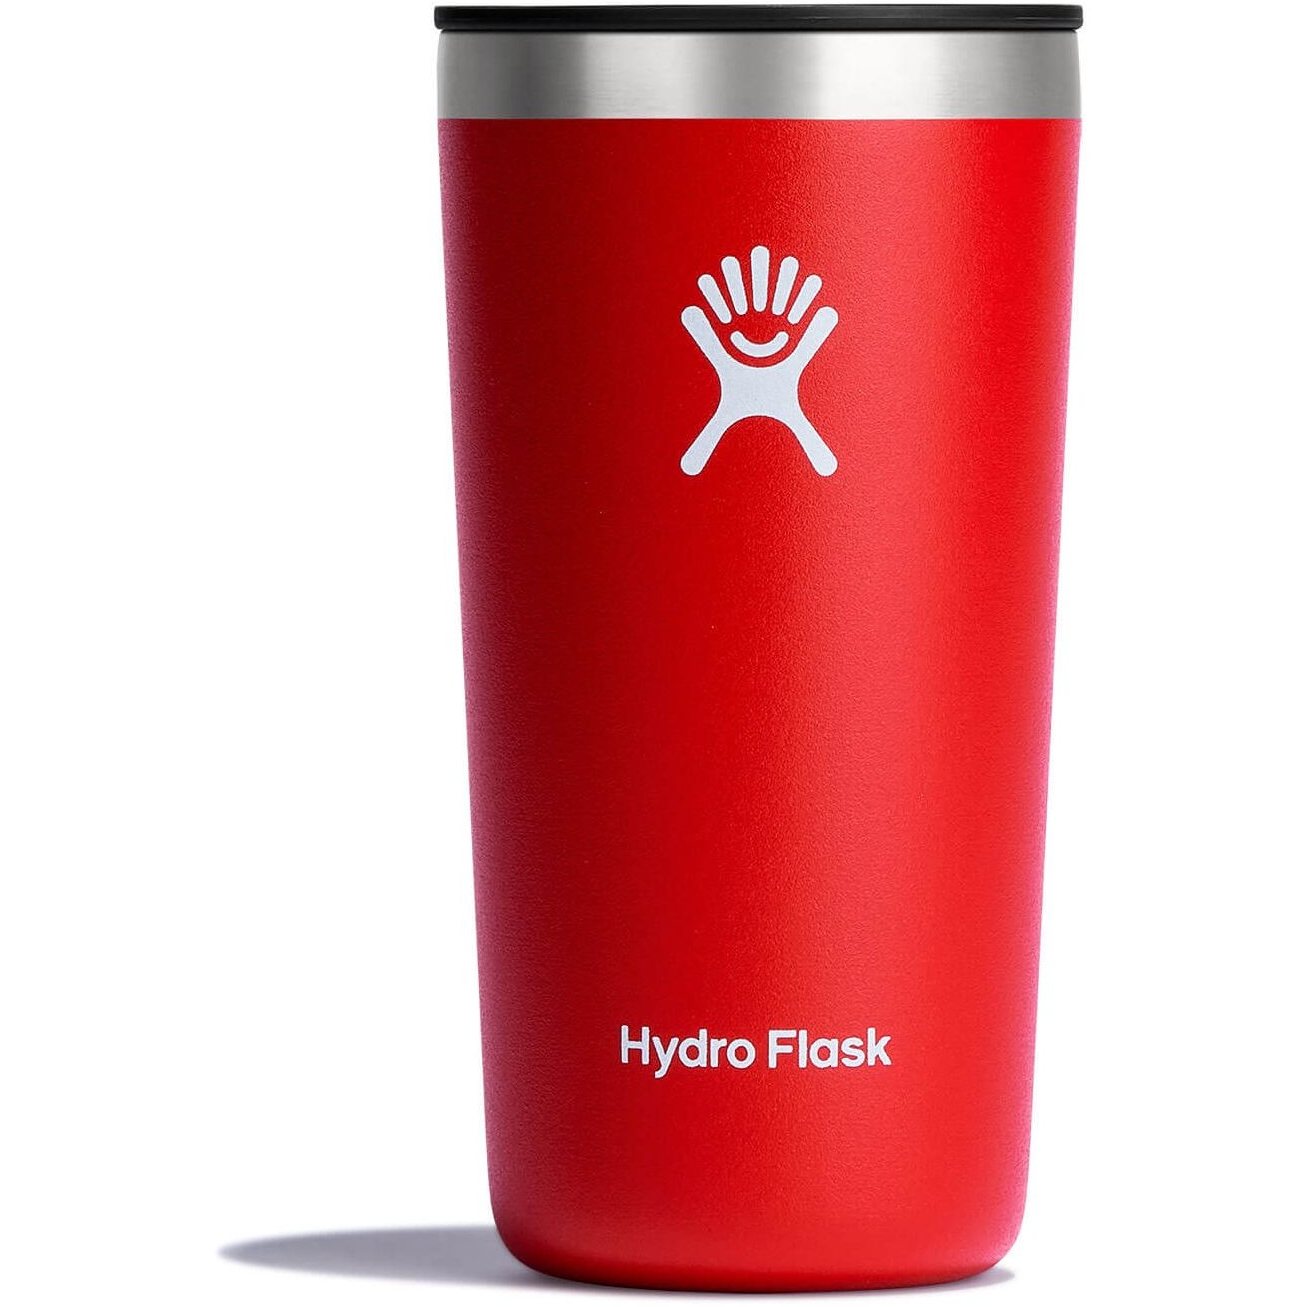 I LOVE Hydro Flask 12 oz All Around Tumbler Pacific Color Review 